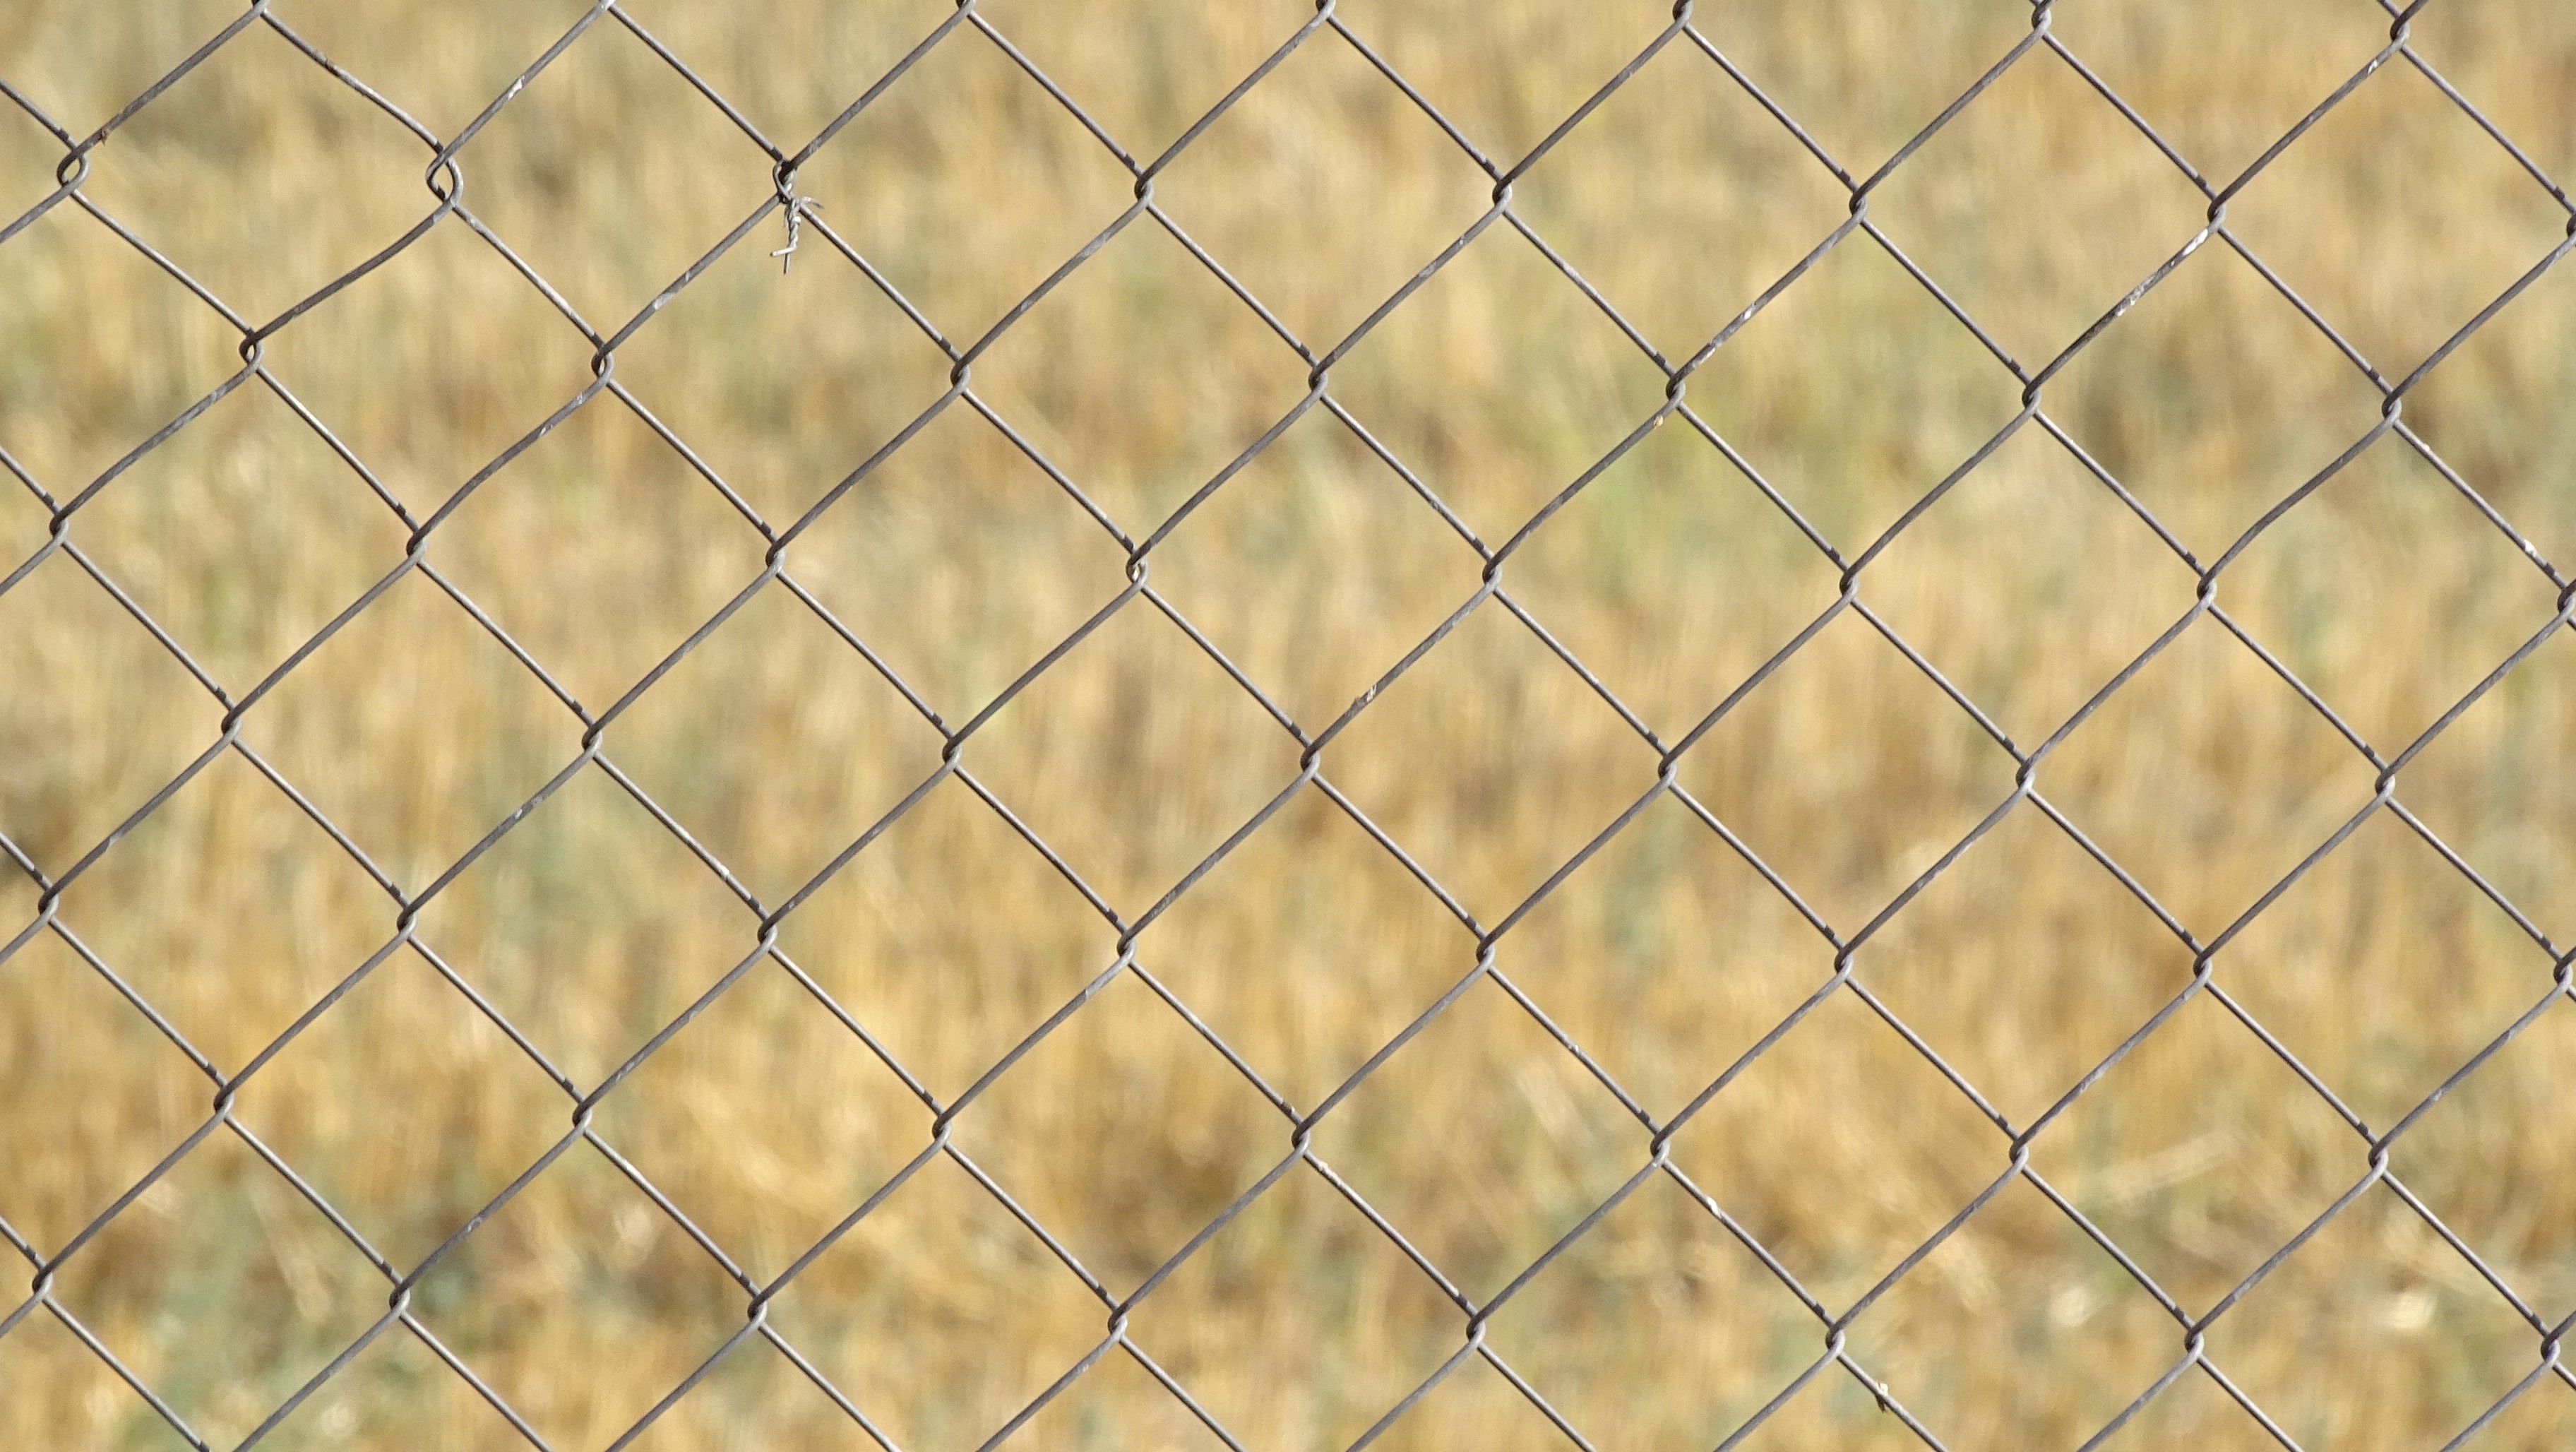 Chain Link Fence Metal 3648x2056